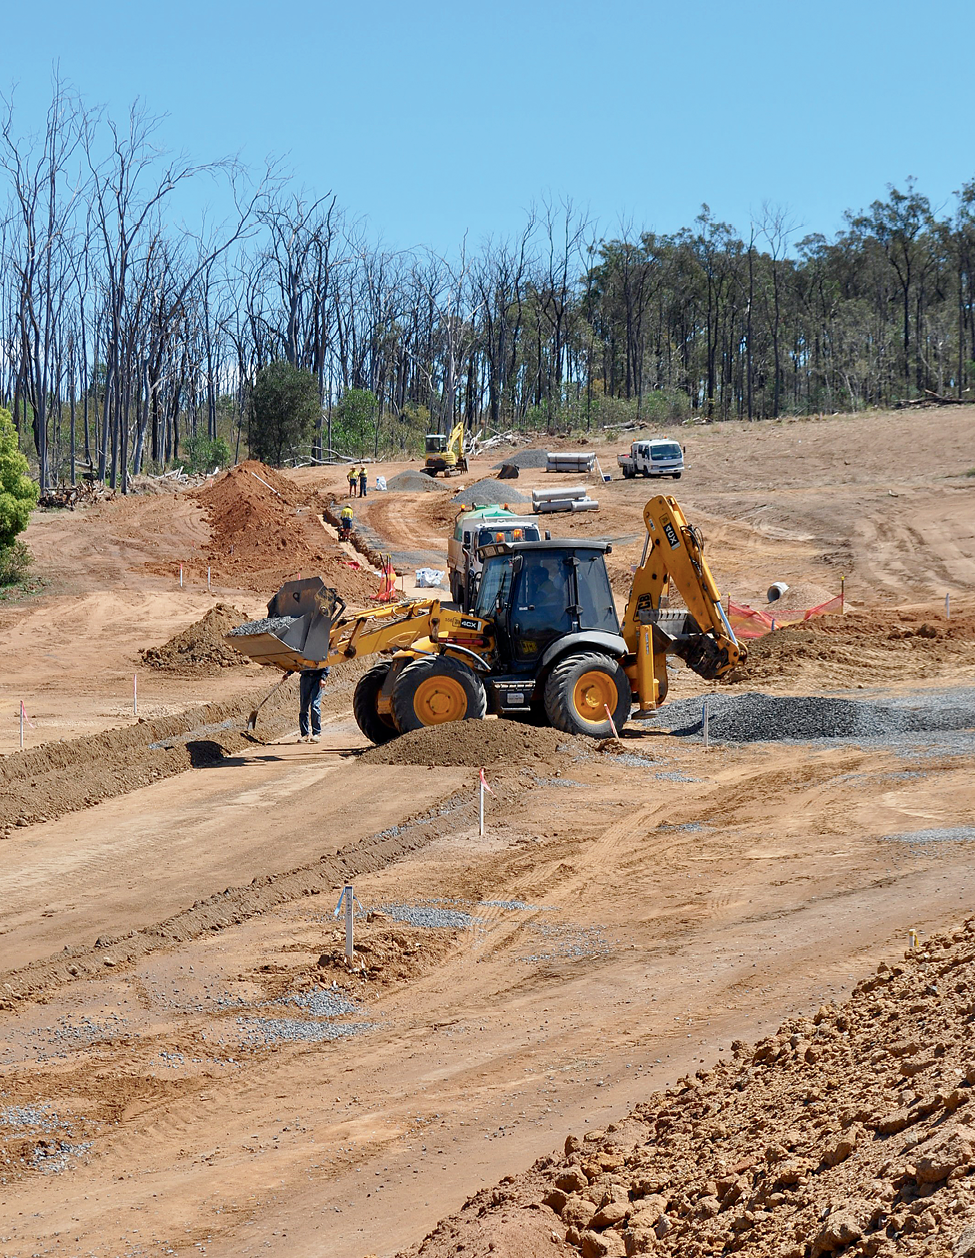 A photograph of road construction equipment digging roads and flattening areas of soil and gravel.